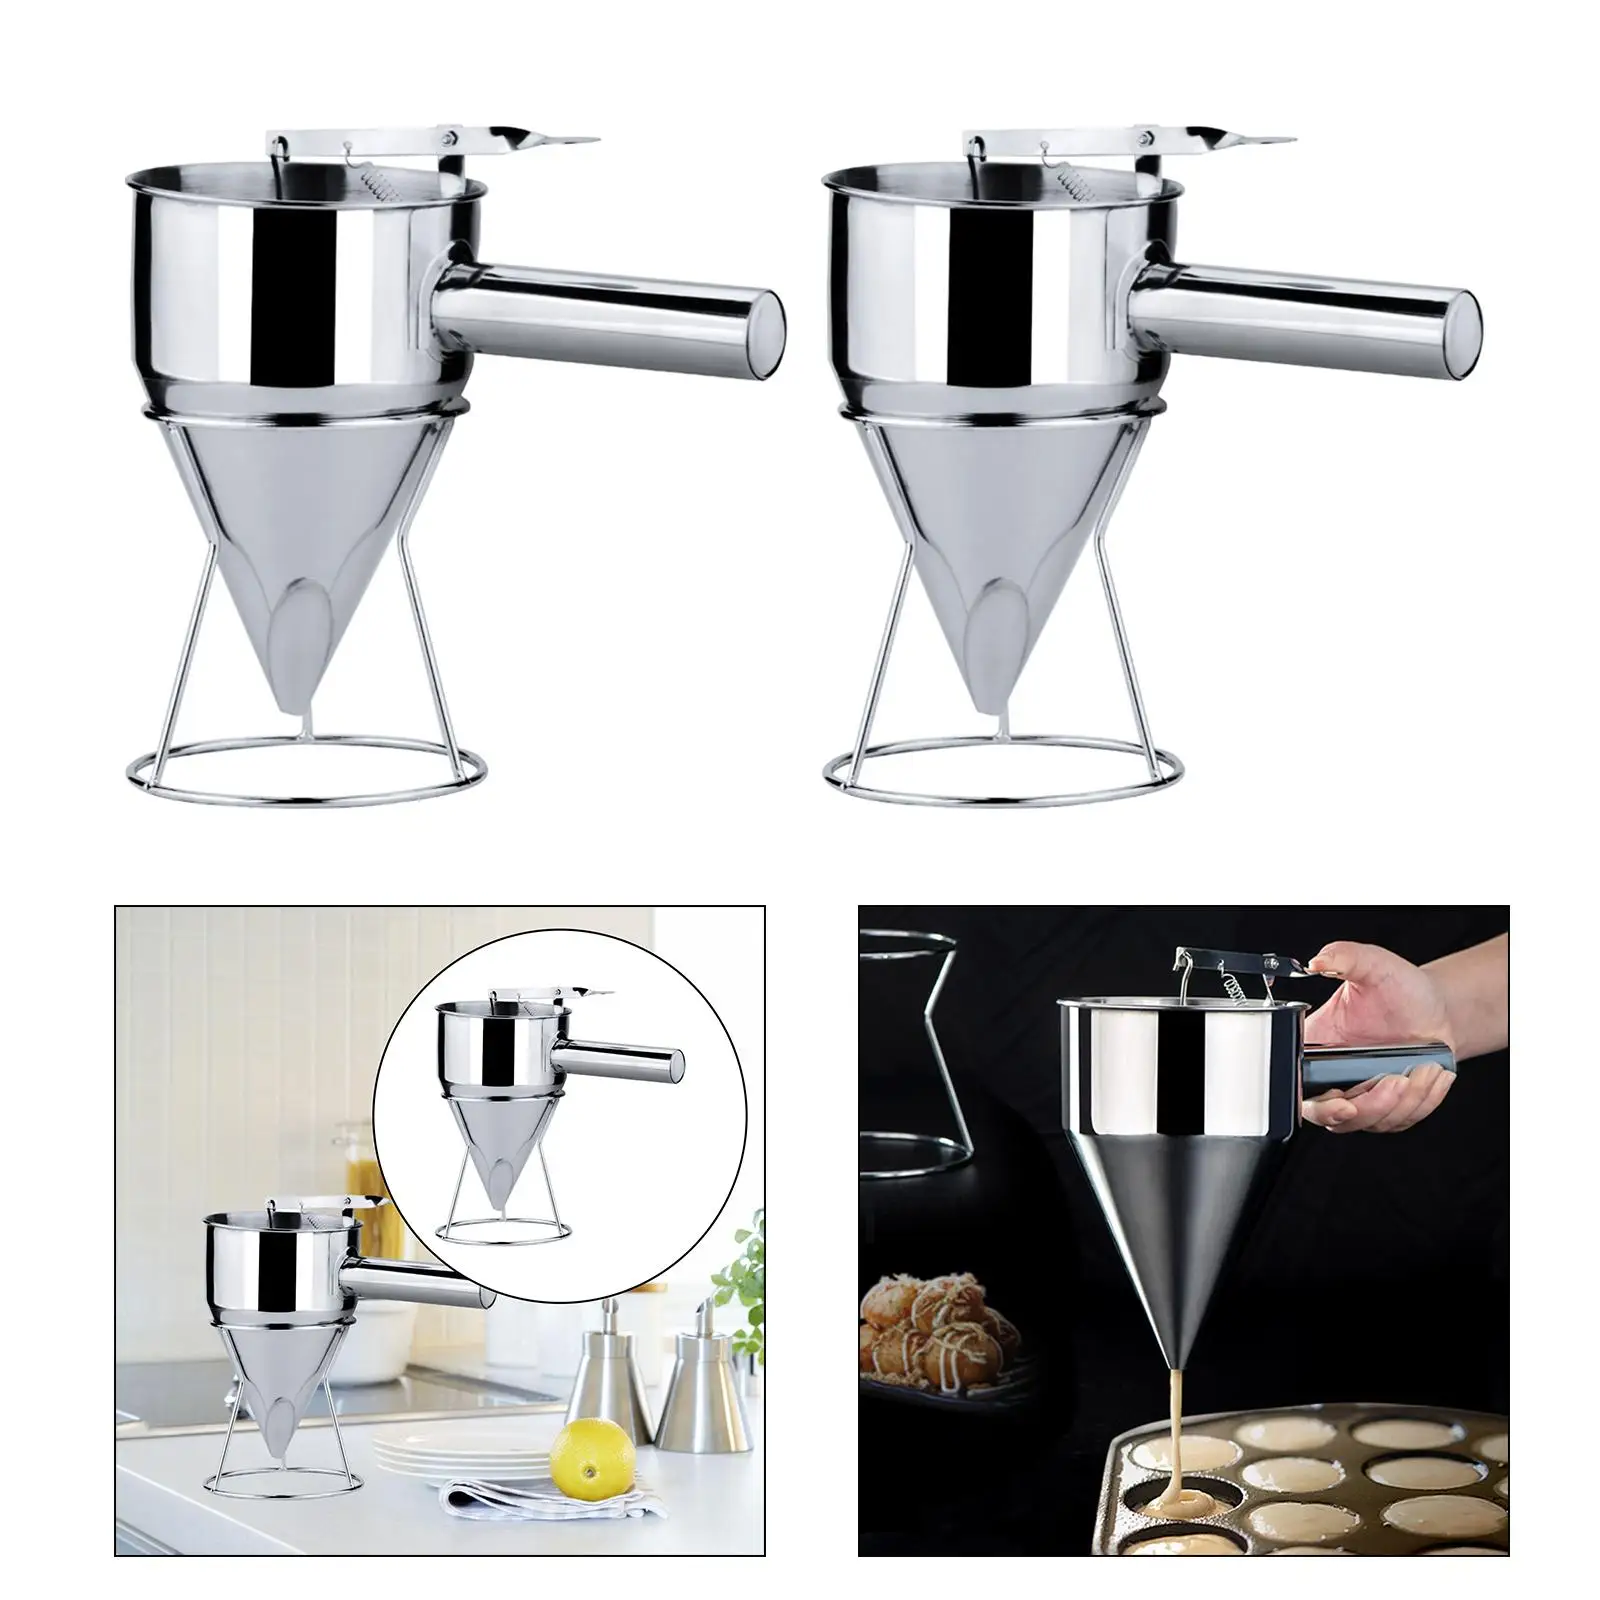 Batter Dispenser with Stand Large Capacity Stainless Steel Kitchen Supplies 1200ml for Takoyaki Balls Biscuits Pancake Cupcake